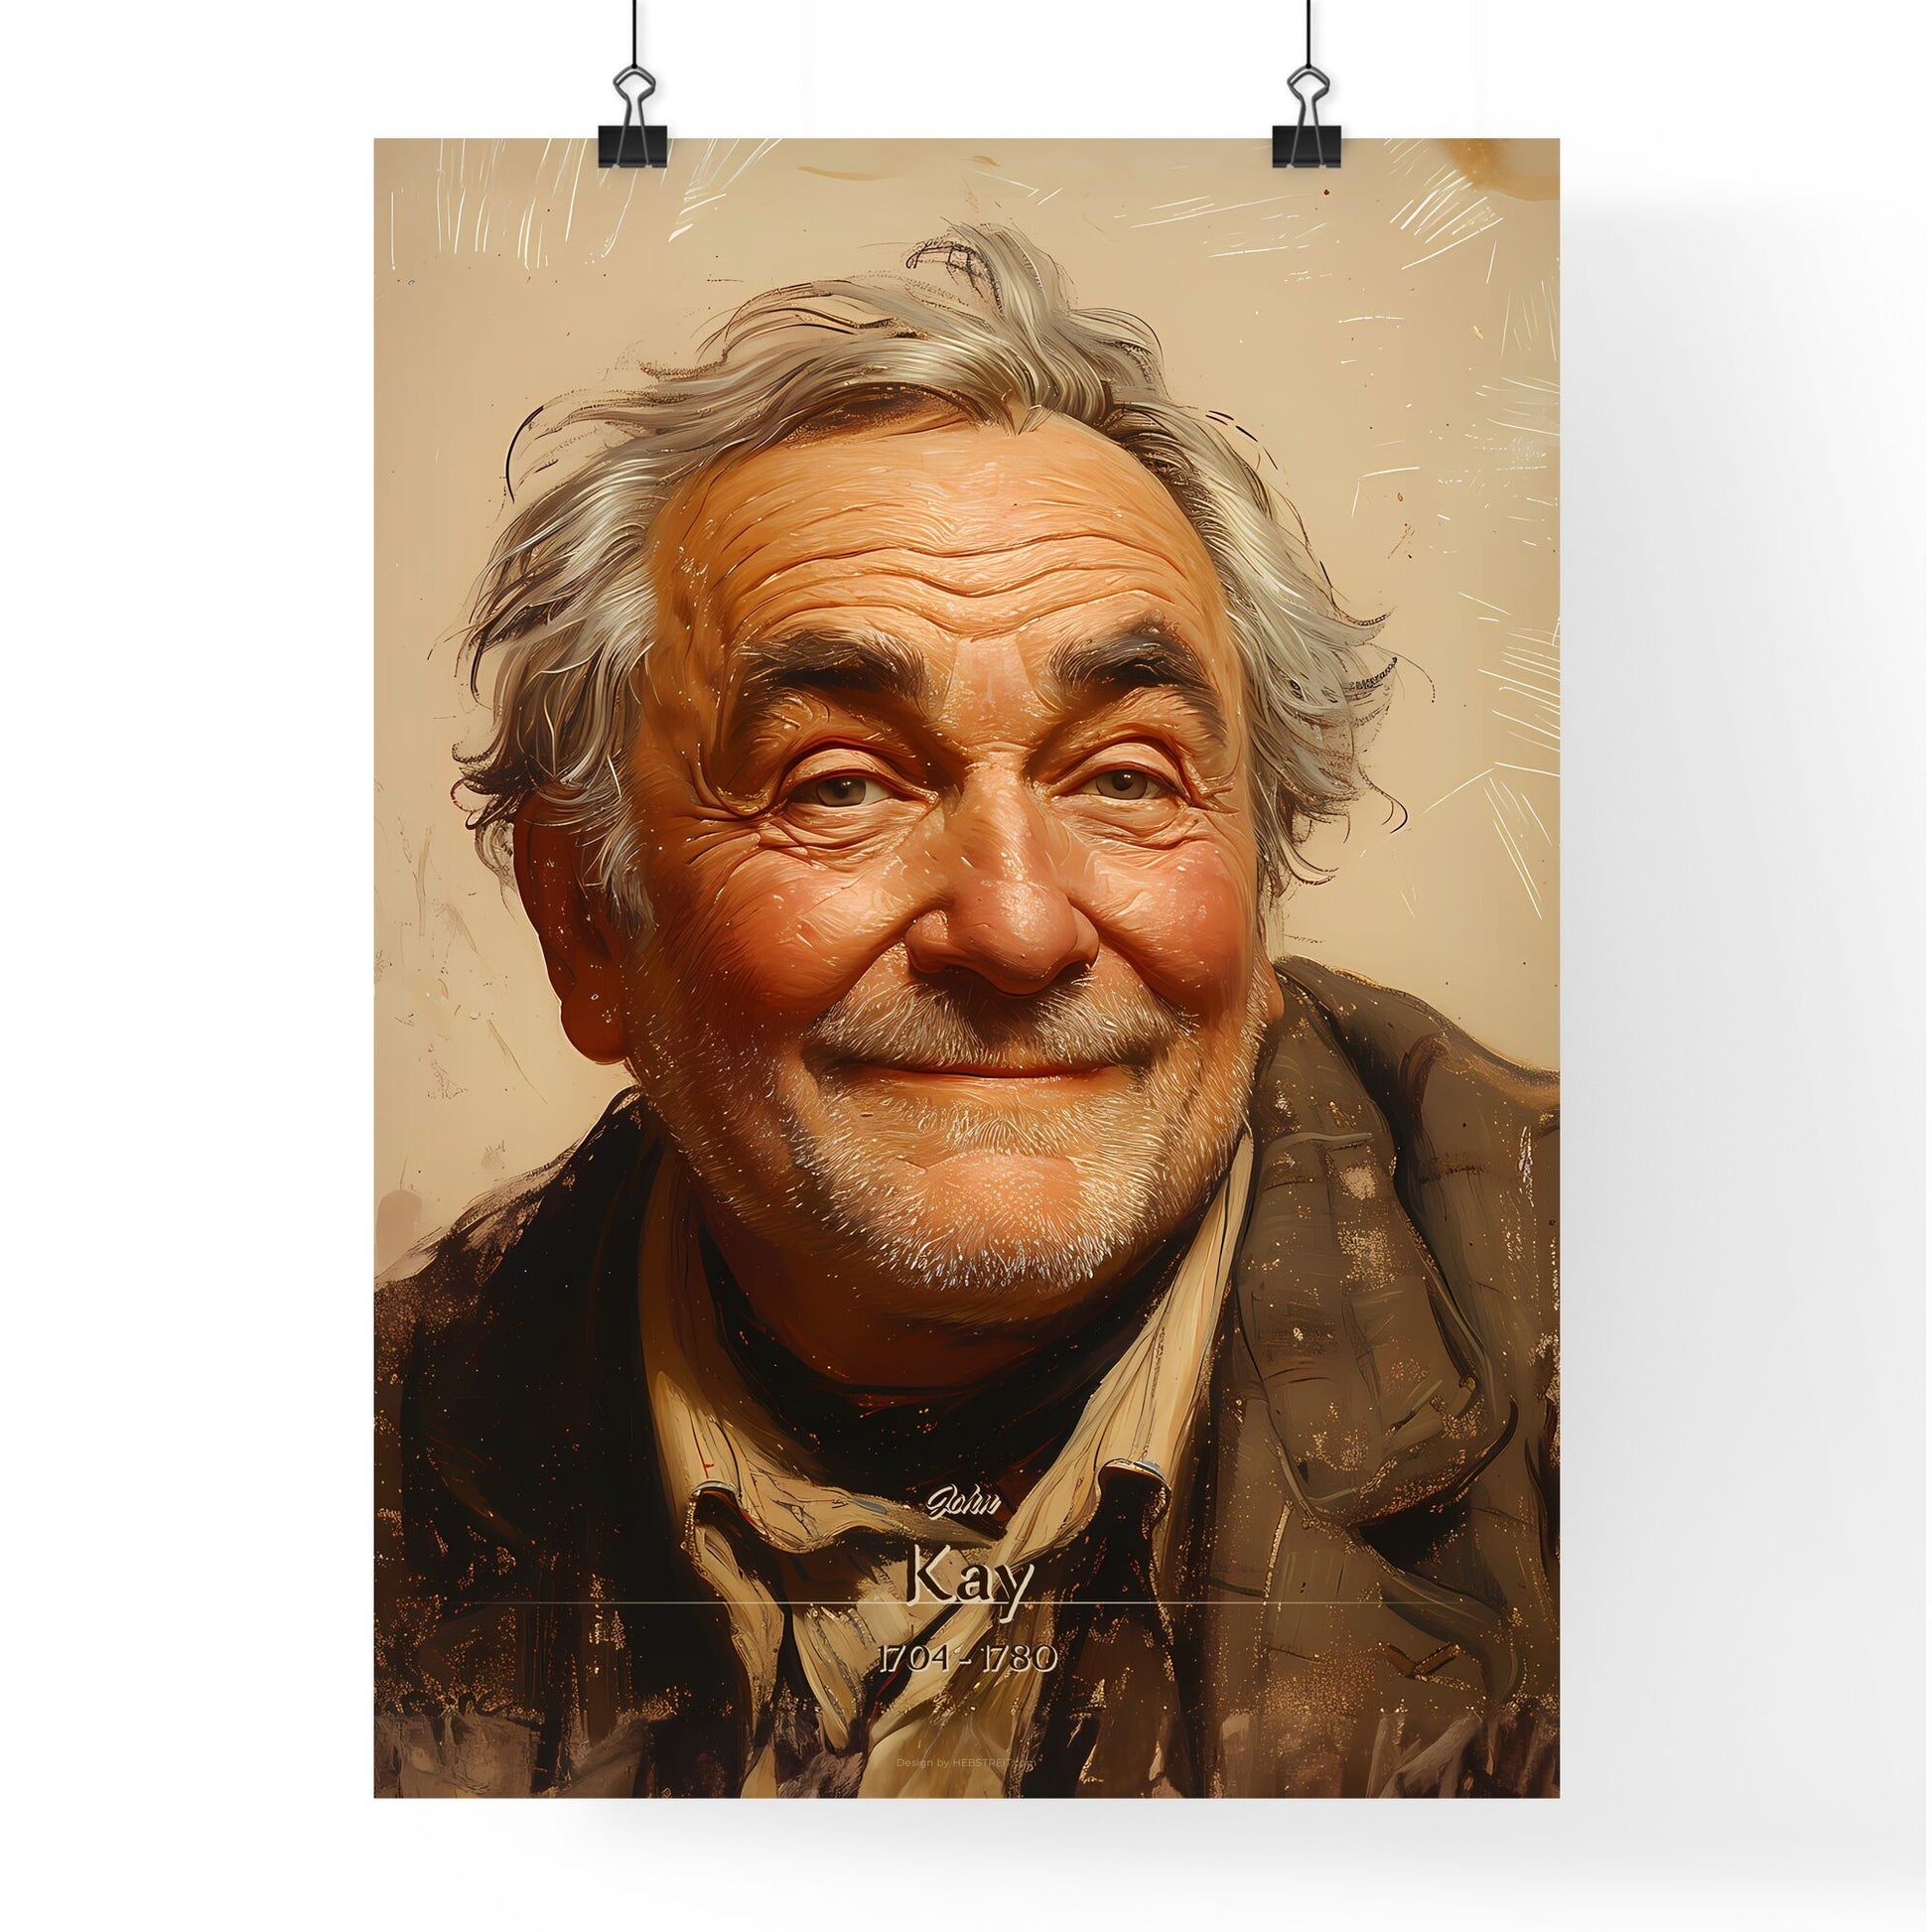 John, Kay, 1704 - 1780, A Poster of a man smiling for the camera Default Title